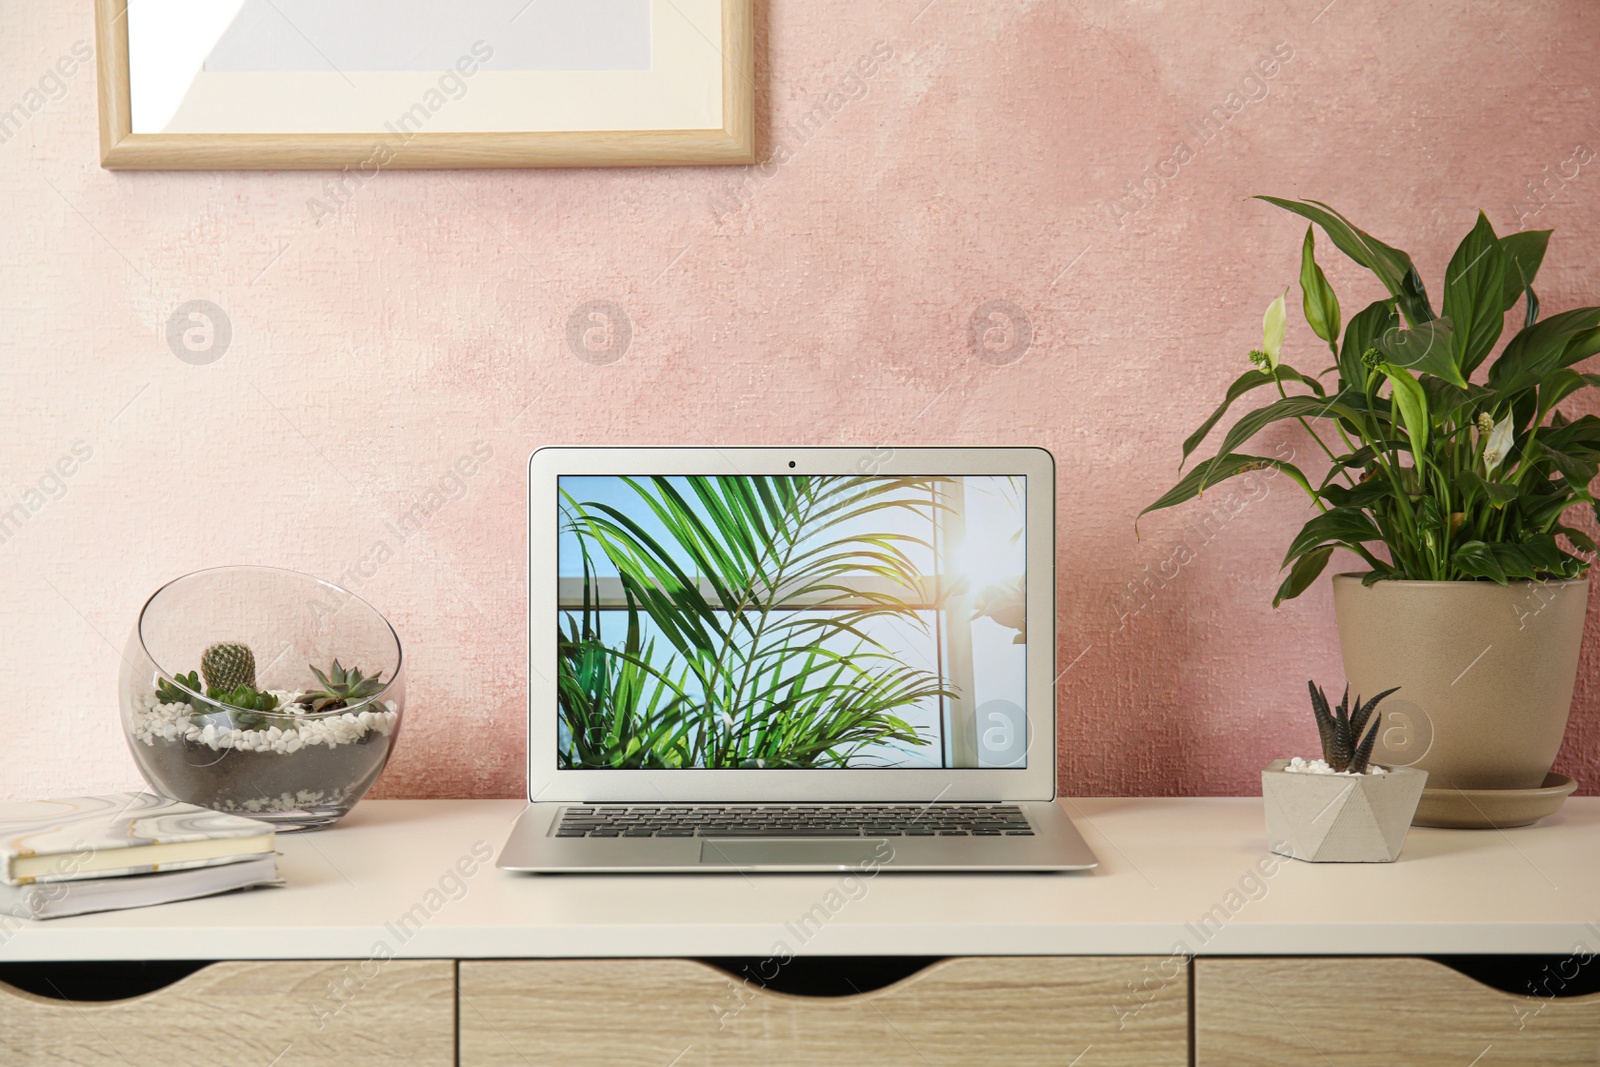 Photo of Houseplants and laptop on table in office interior